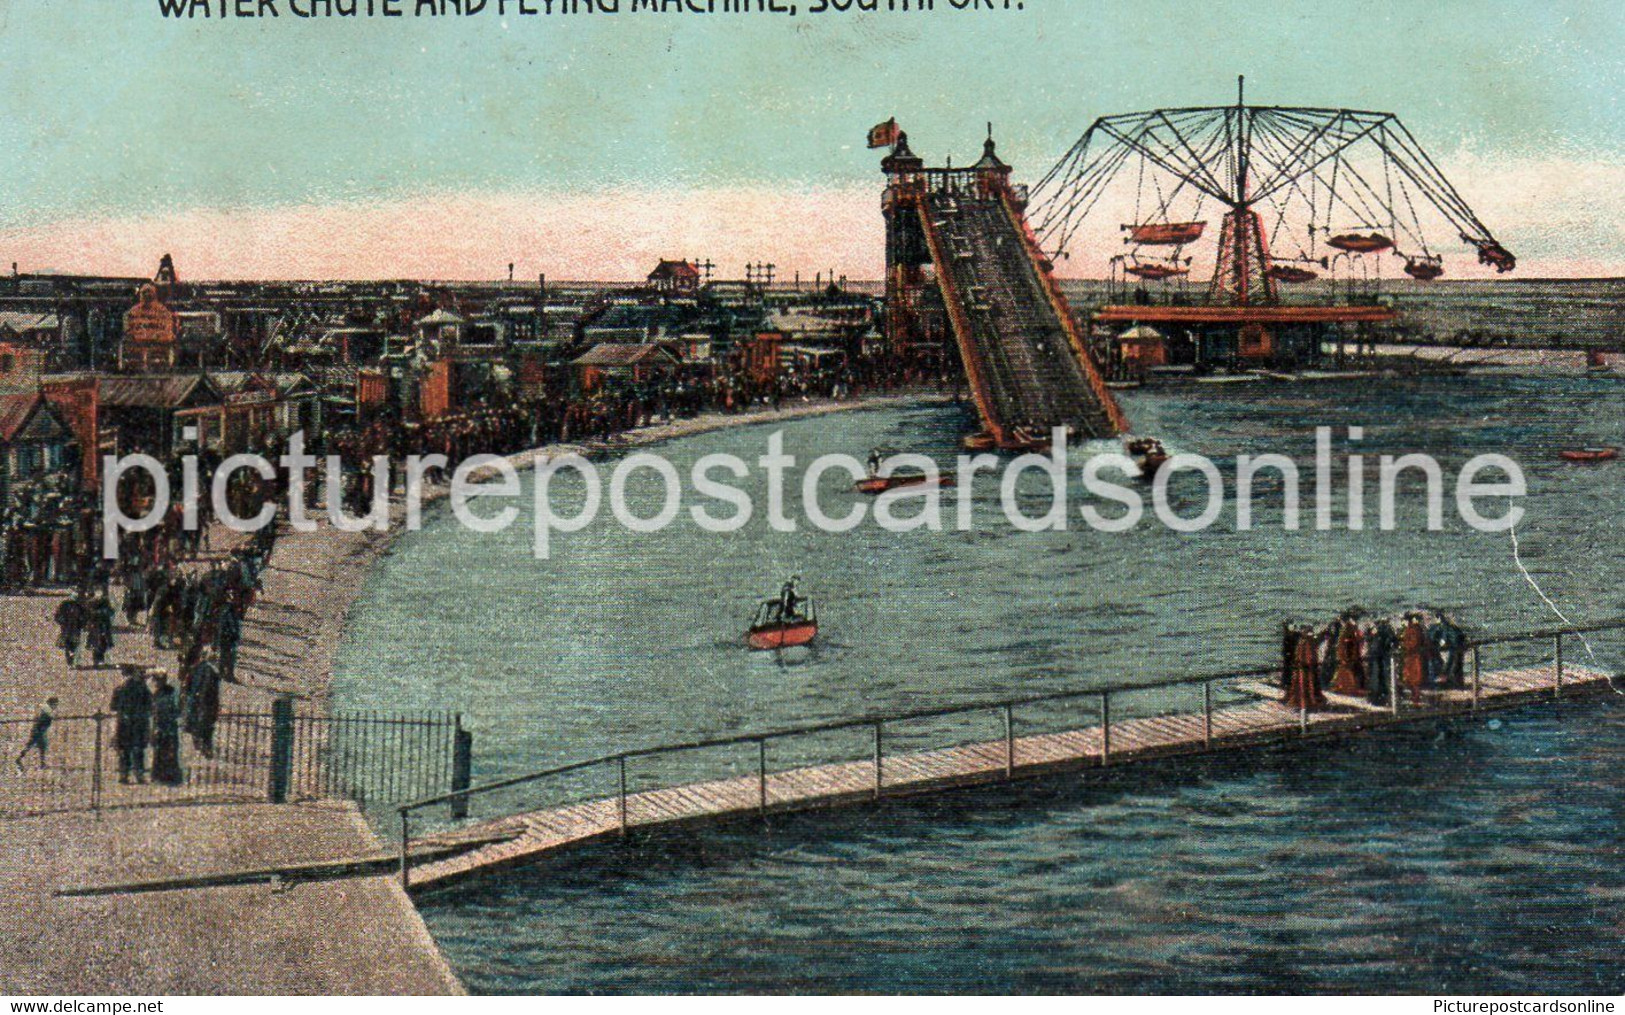 WATER SHUTE AND FLYING MACHINE OLD COLOUR POSTCARD SOUTHPORT LANCASHIRE - Southport